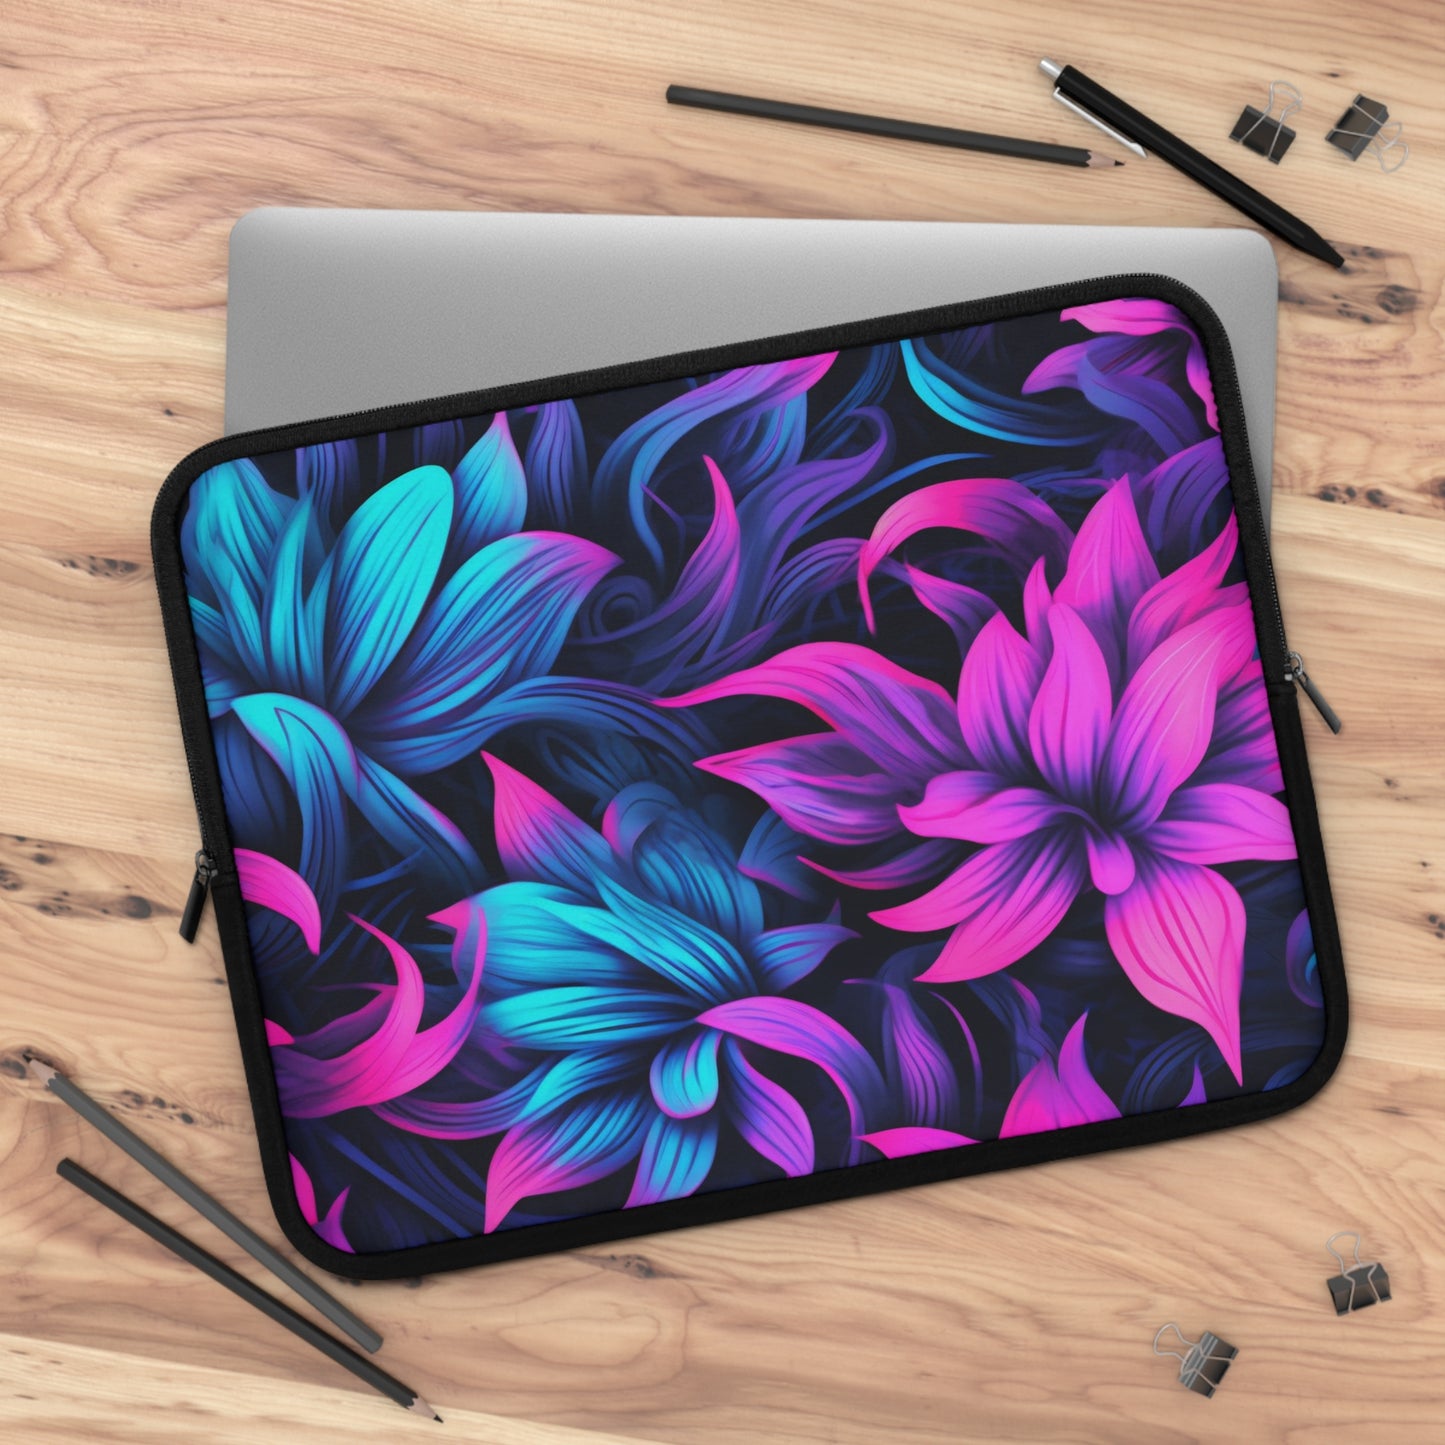 Synthwave Flowers Laptop SleeveNeon Synthwave Flowers Laptop Sleeve, Vaporwave Tablet Sleeve, Pink and Blue Retro iPad Cover, Floral Aesthetic MacBook Case, Laptop Bag